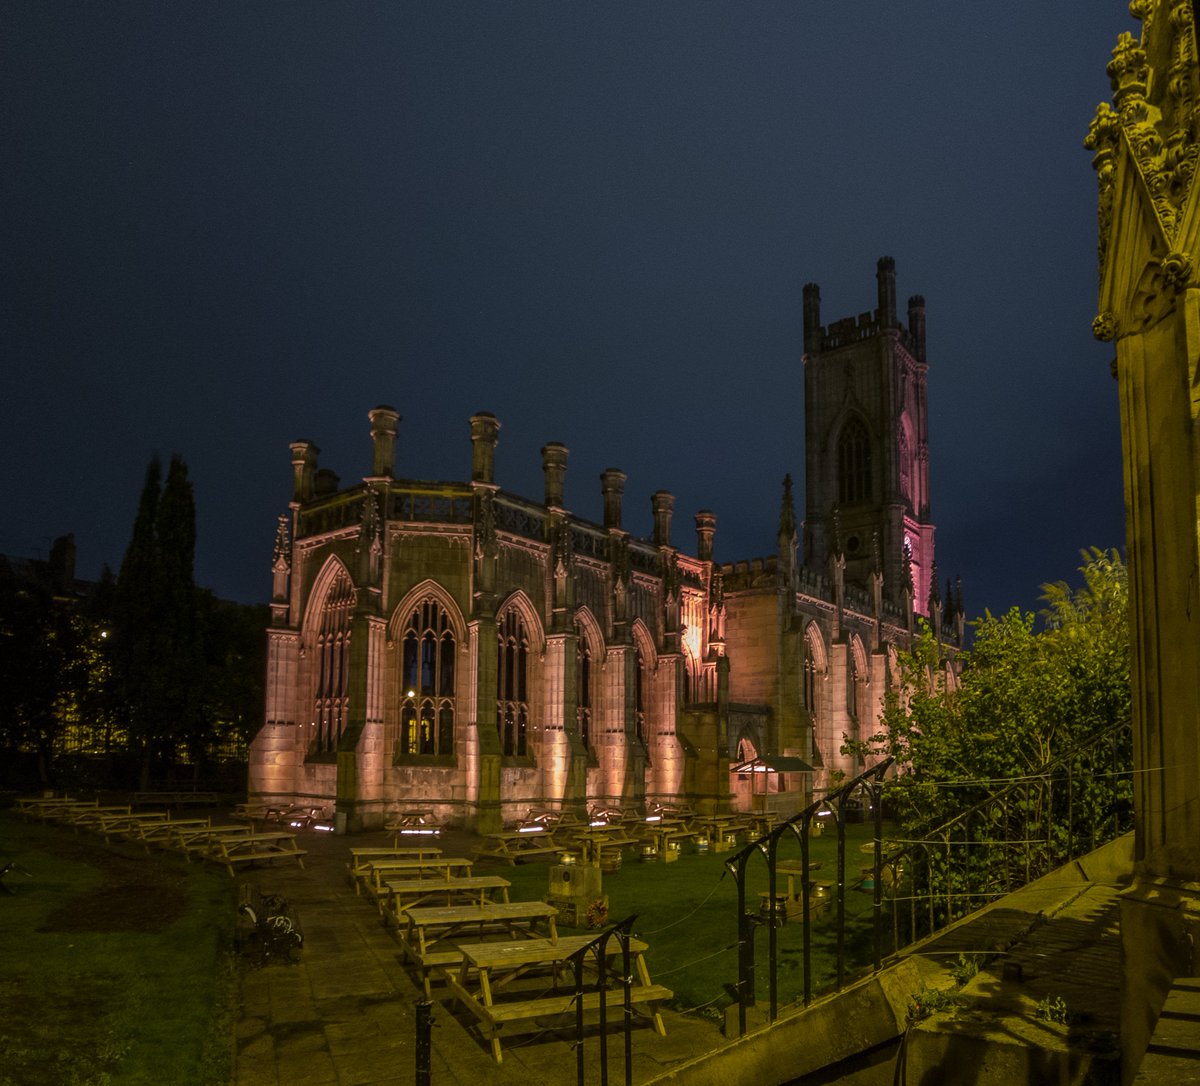 St Luke's, AKA the bombed out church, shot Saturday night on my galaxy S20 using a 1s exposure for each shot.

@LiverpoolVista @PicsOfLpool @Beau_Liverpool @angiesliverpool @lensliverpool @BombedOutChurch